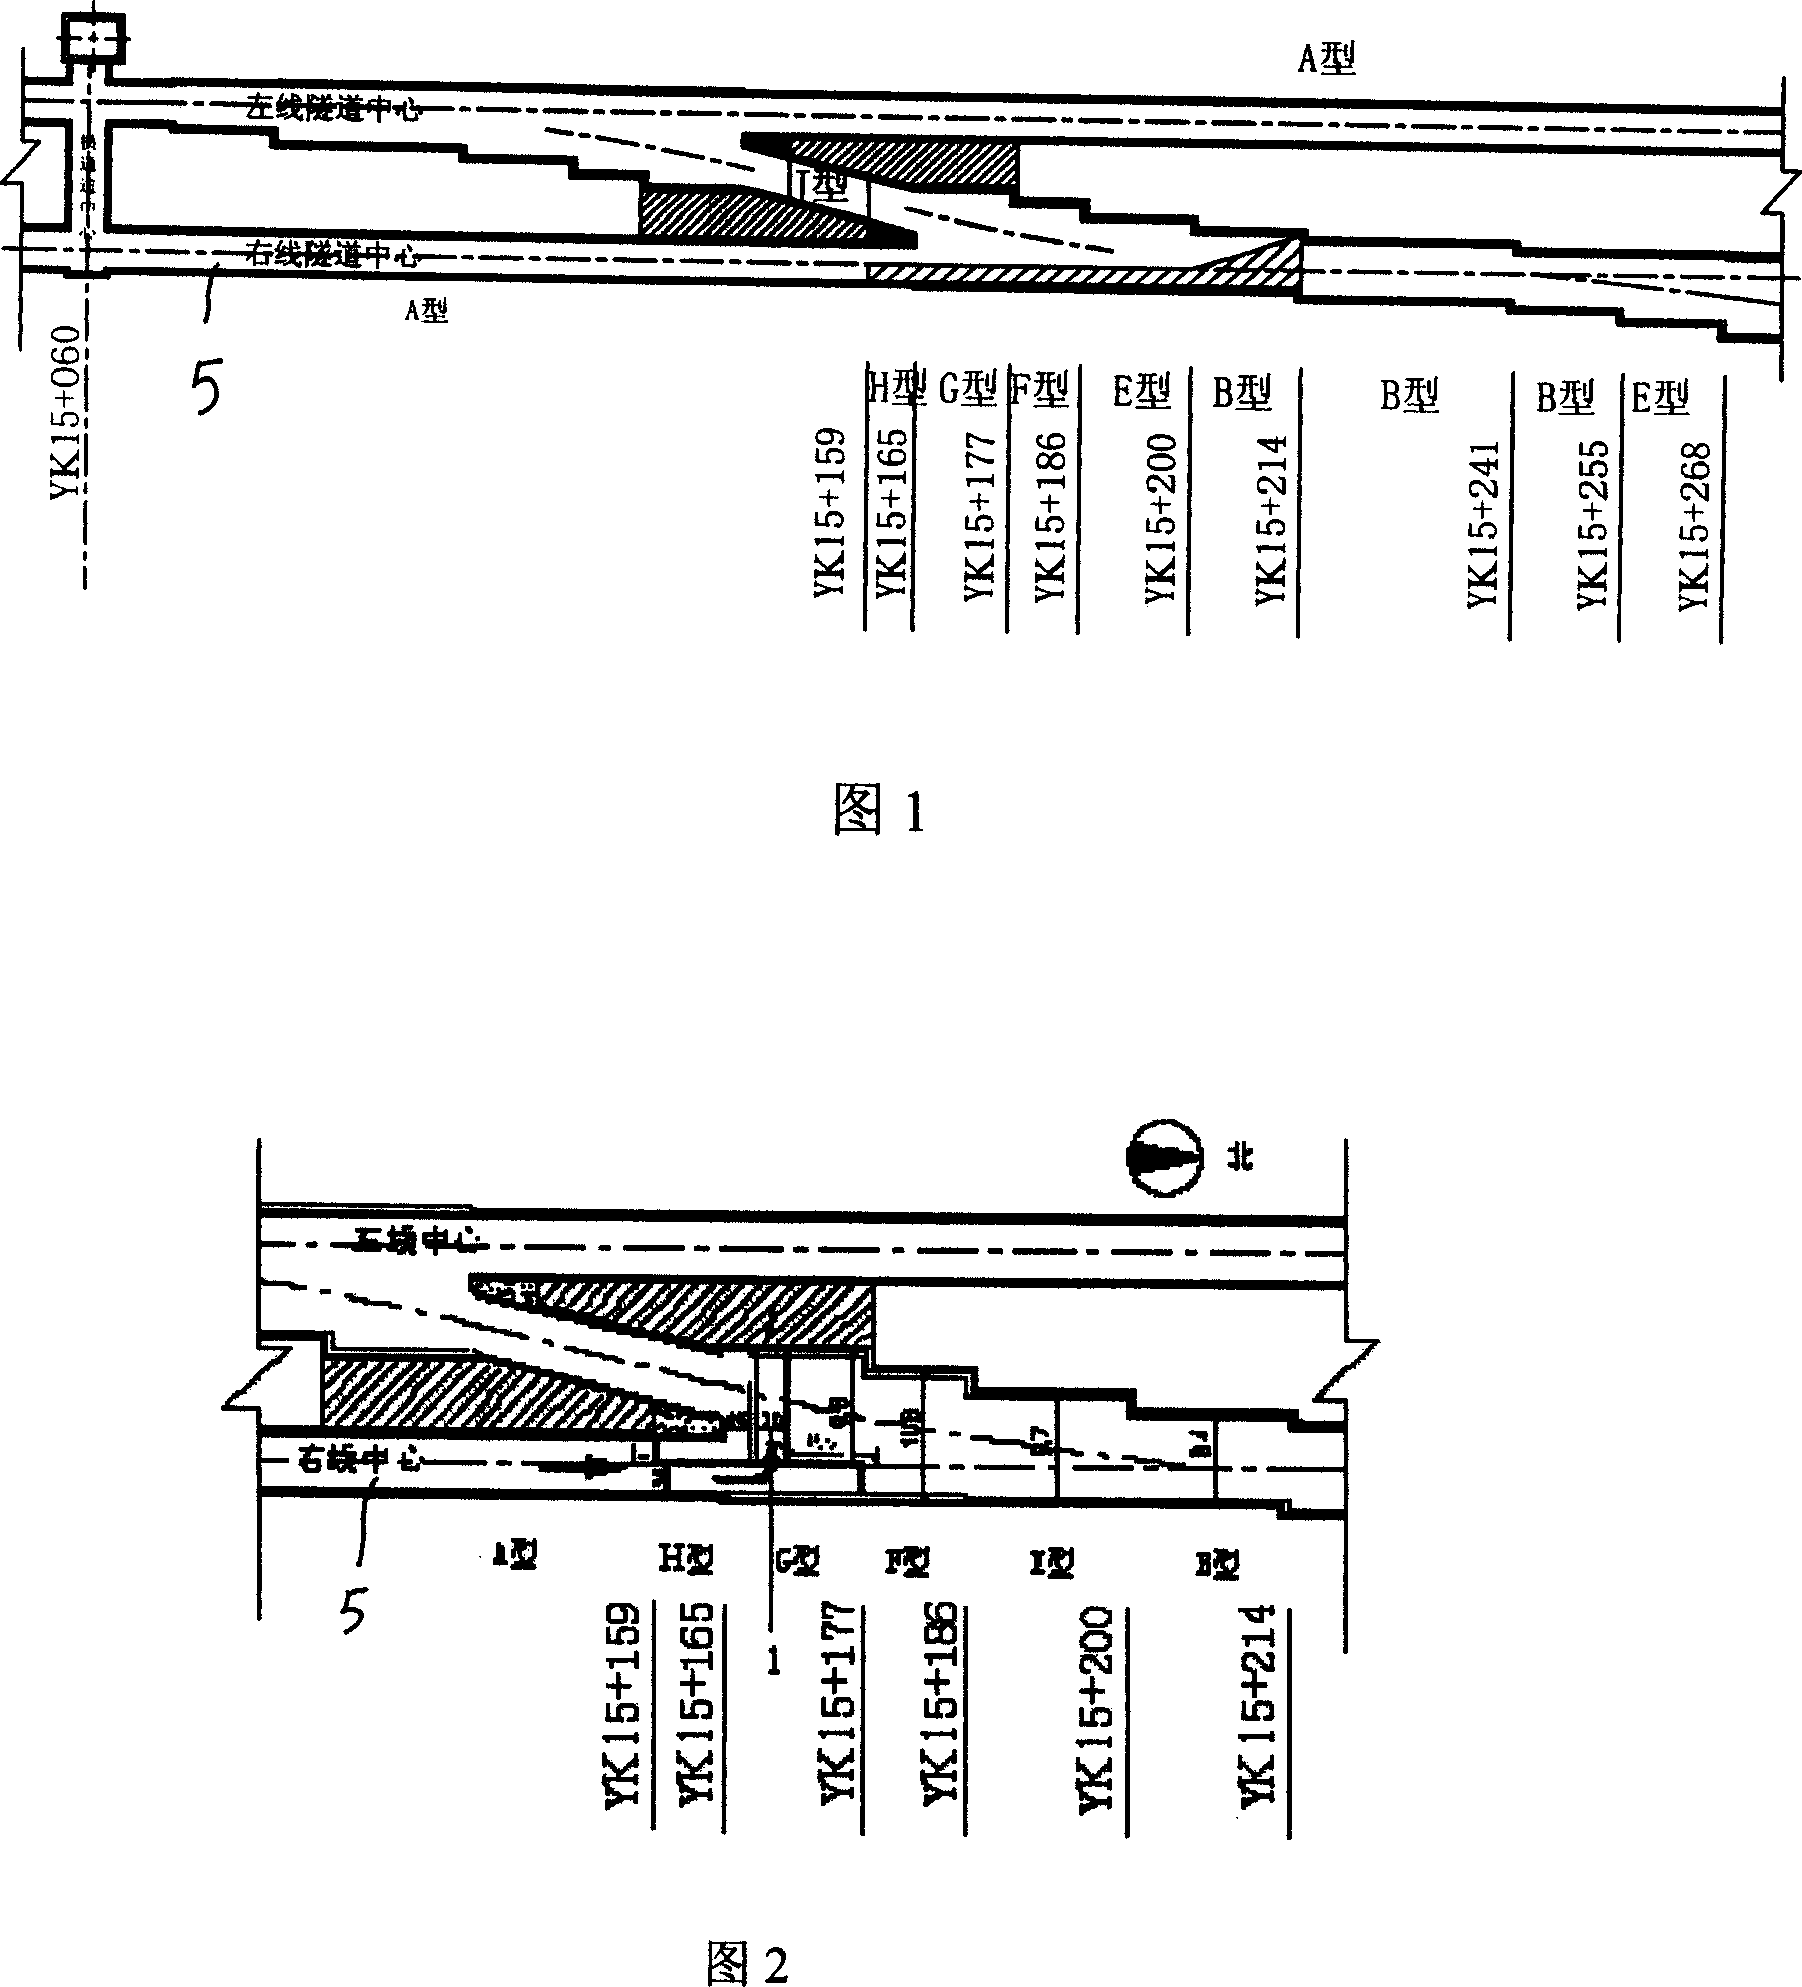 Rapid-construction method for rapid change of small-section into large-section tunnel